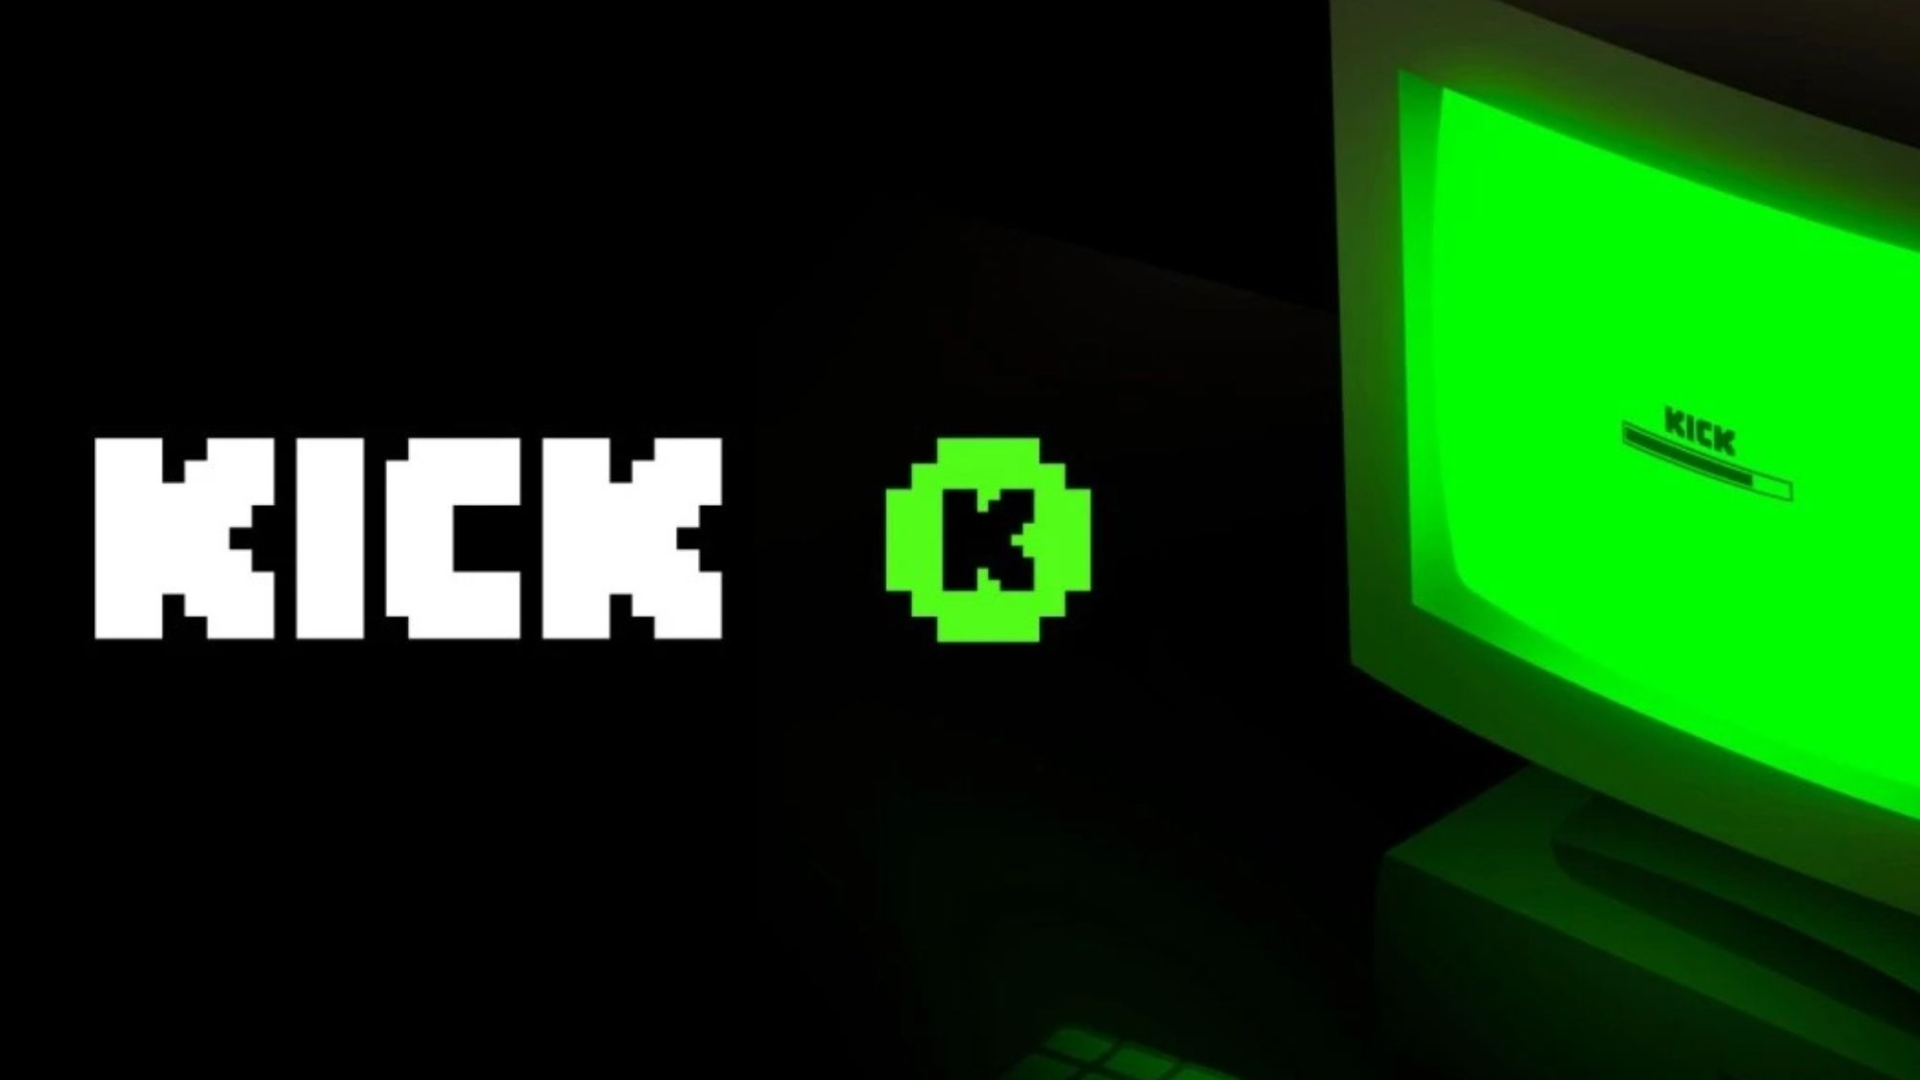 Level Up Blog launches Kick channel